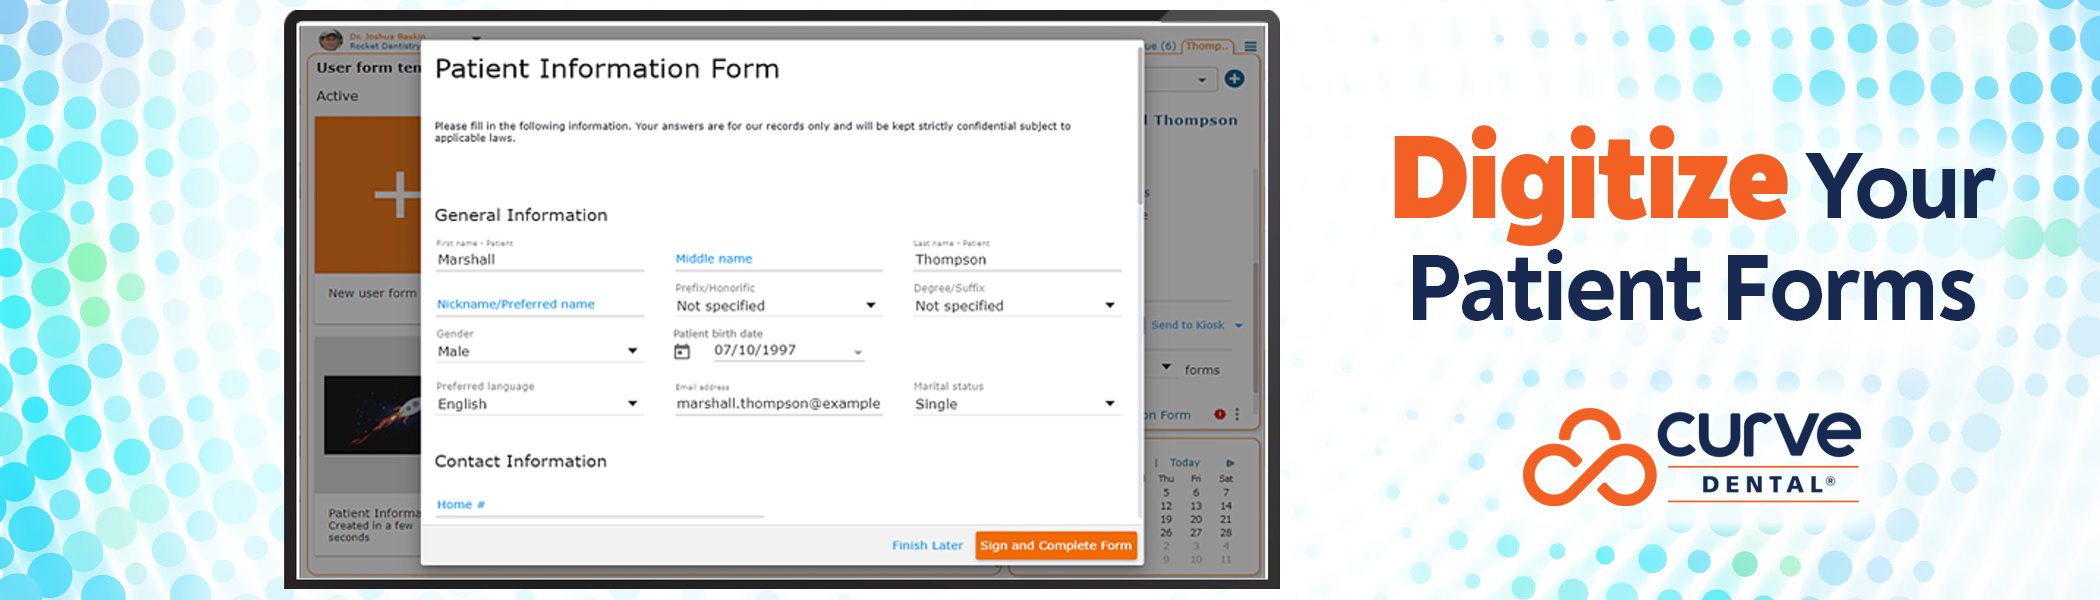 Digitize Your Patient Forms: Make it Easy for Patients AND Staff